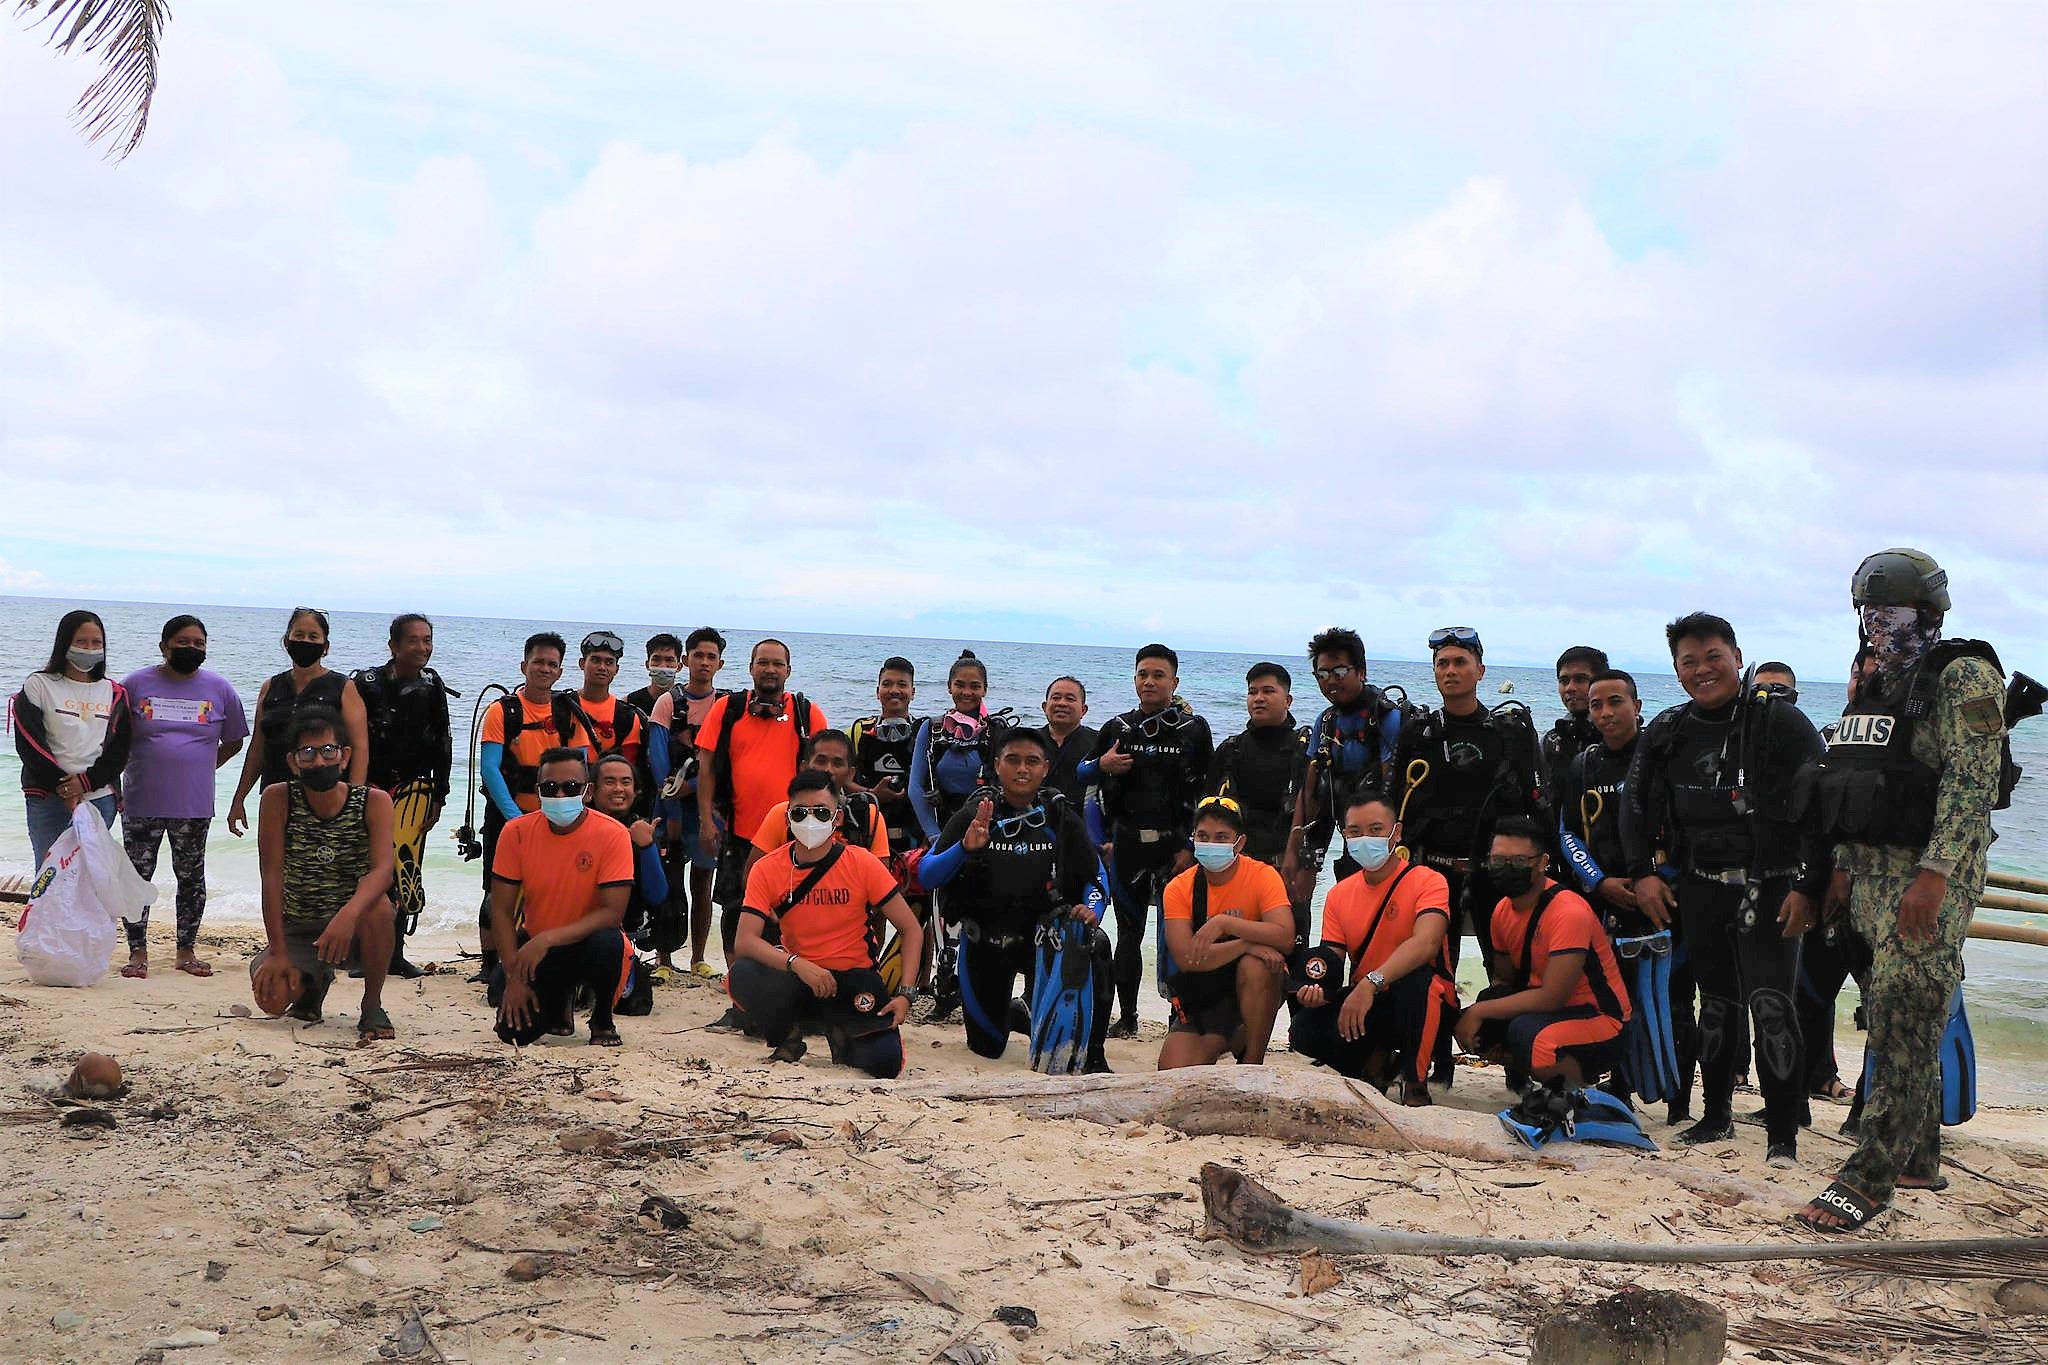 PENRO Siquijor leads the Coastal Clean-up